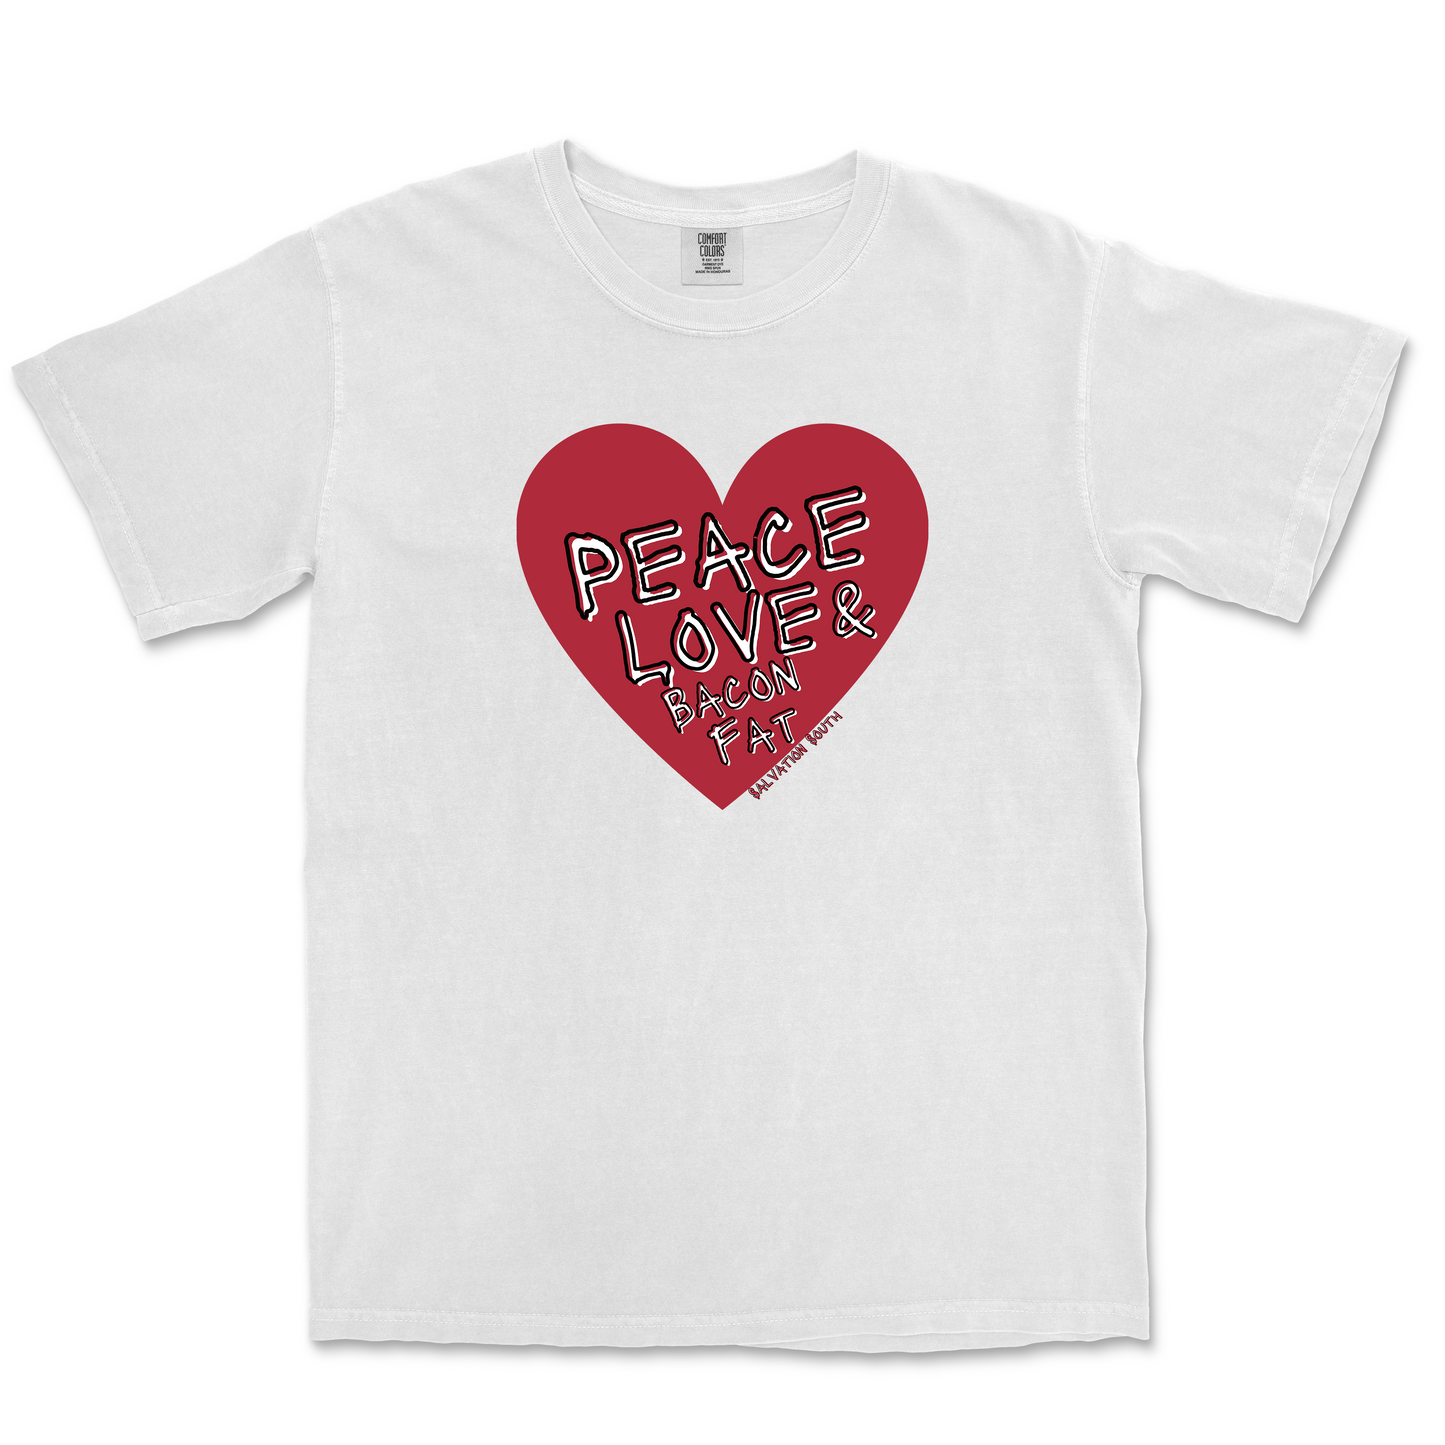 Salvation South - The Peace Love & Bacon Fat T-shirt